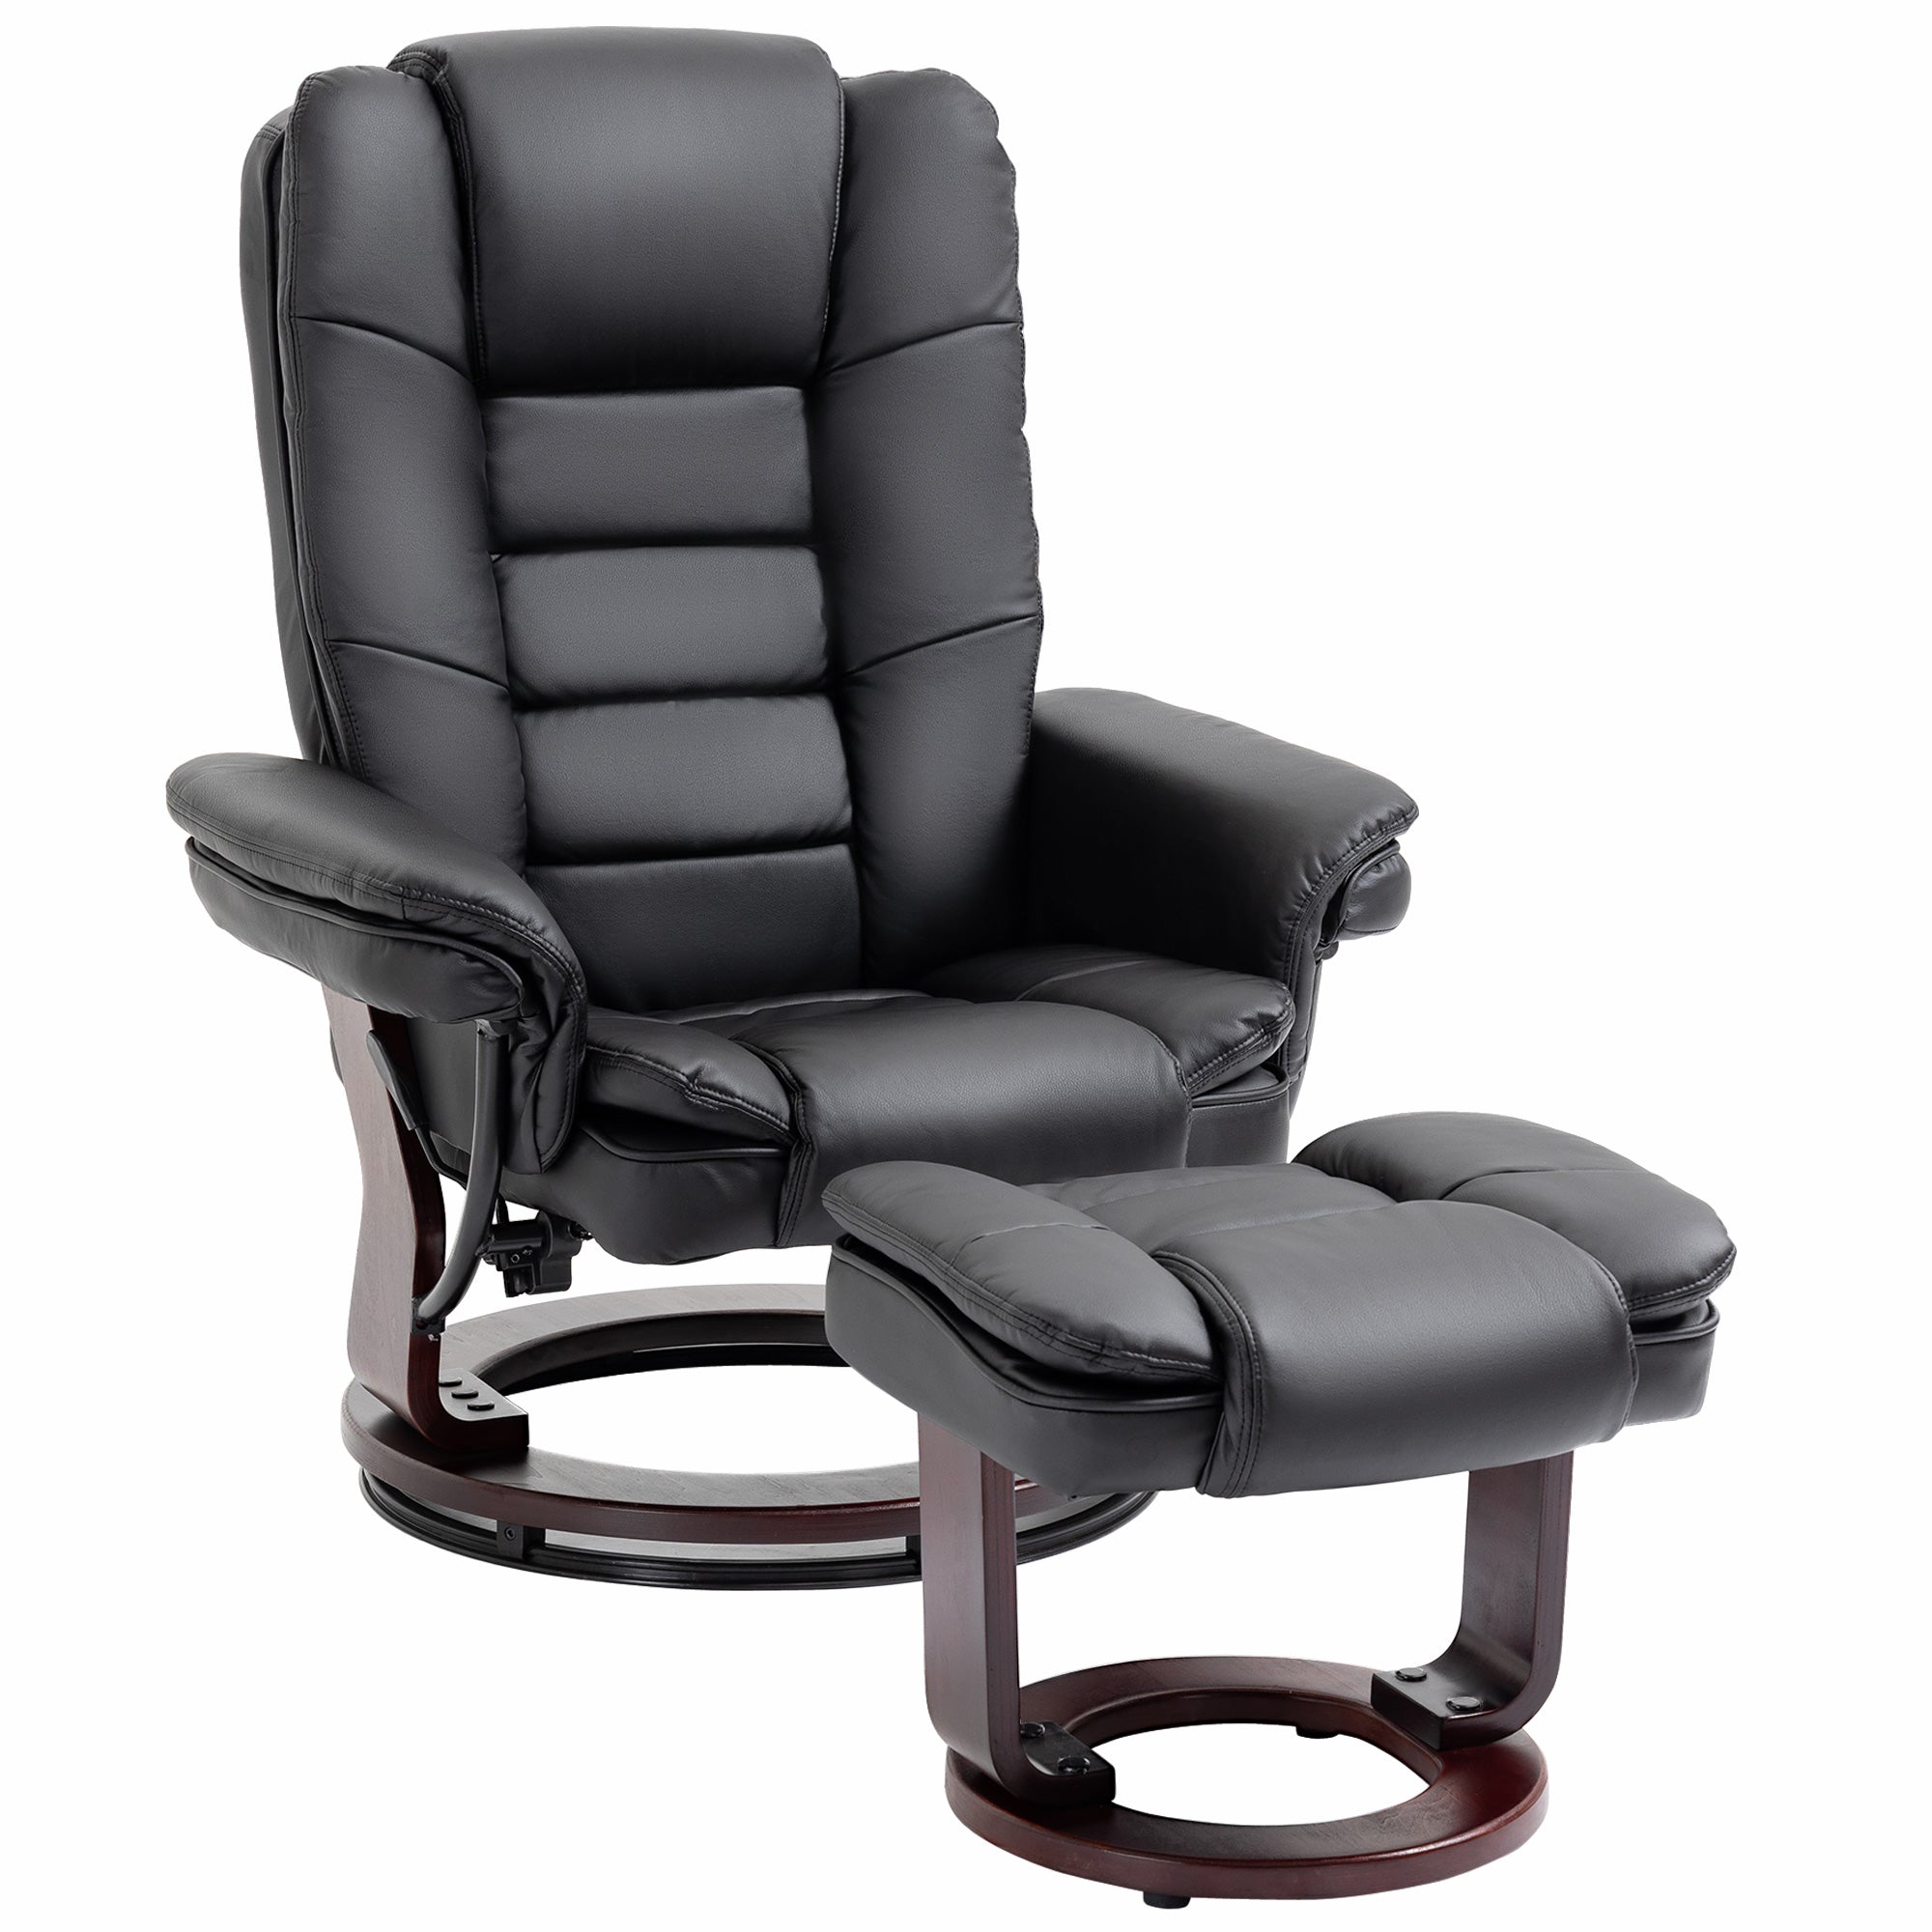 HOMCOM Swivel Manual Recliner and Footrest Set PU Leather Lounge Chair Black  | TJ Hughes